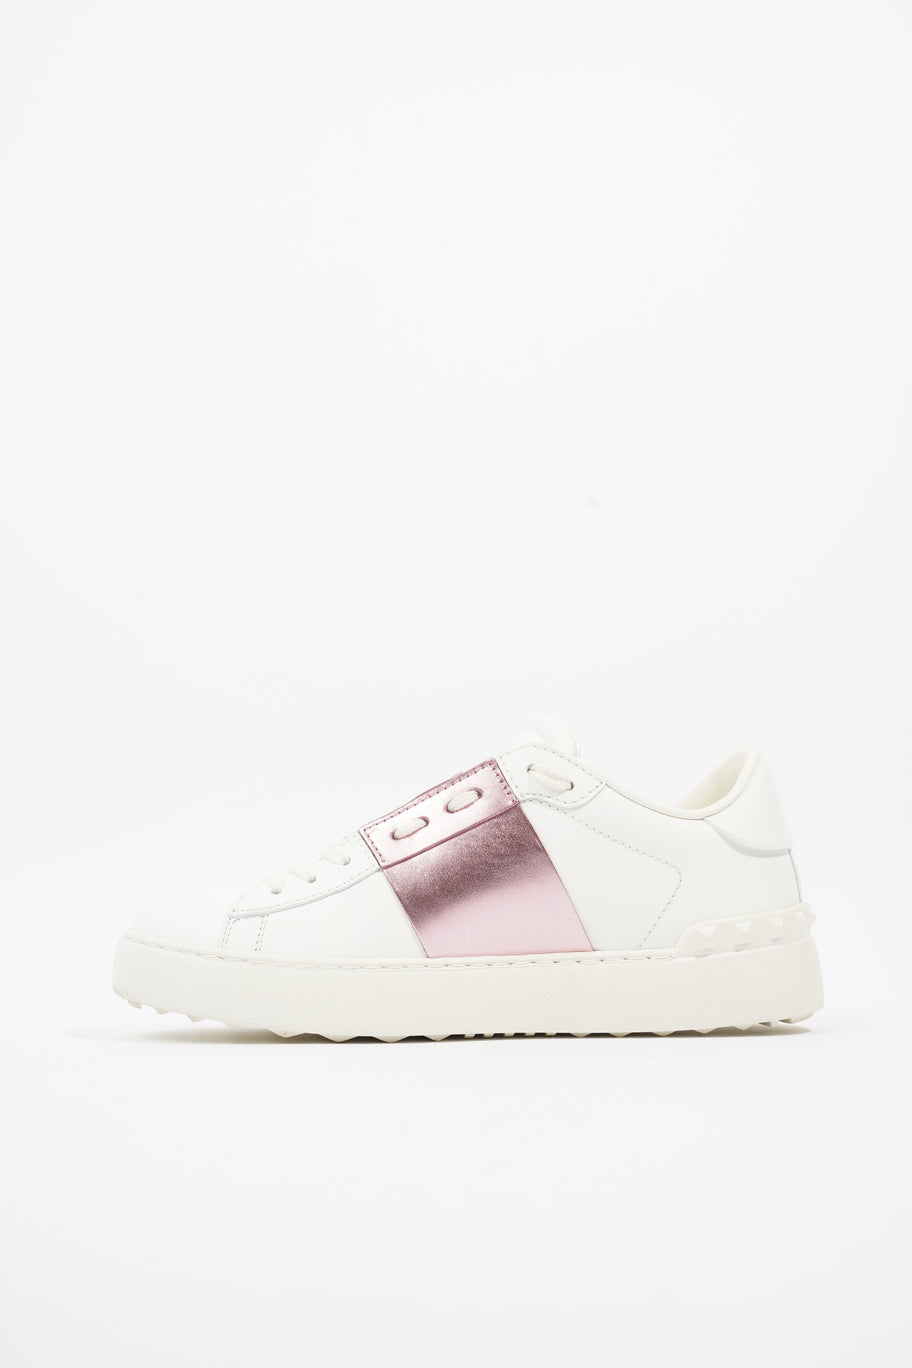 Open Sneakers White / Pink Leather EU 37.5 UK 4.5 Image 3